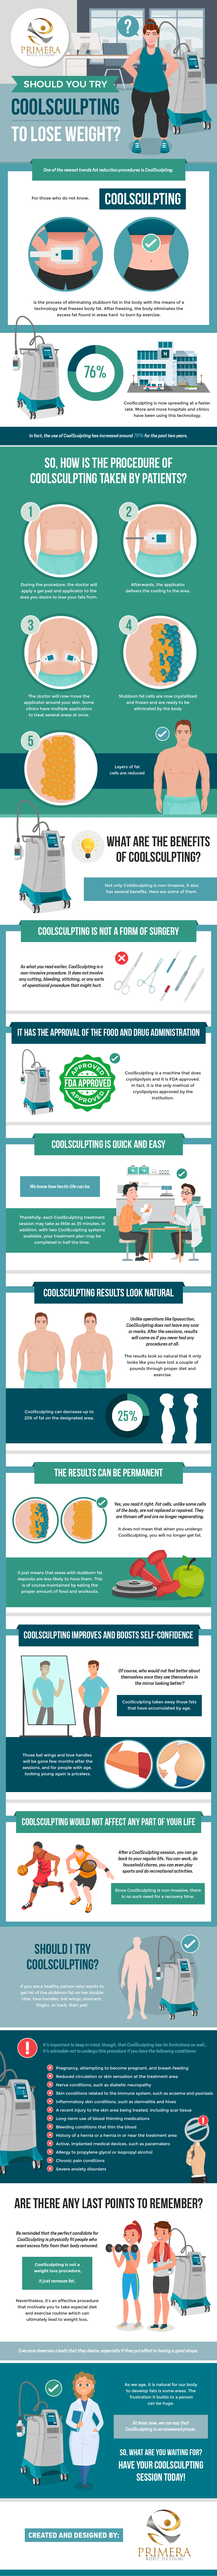 CoolSculpting-to-Lose-Weight